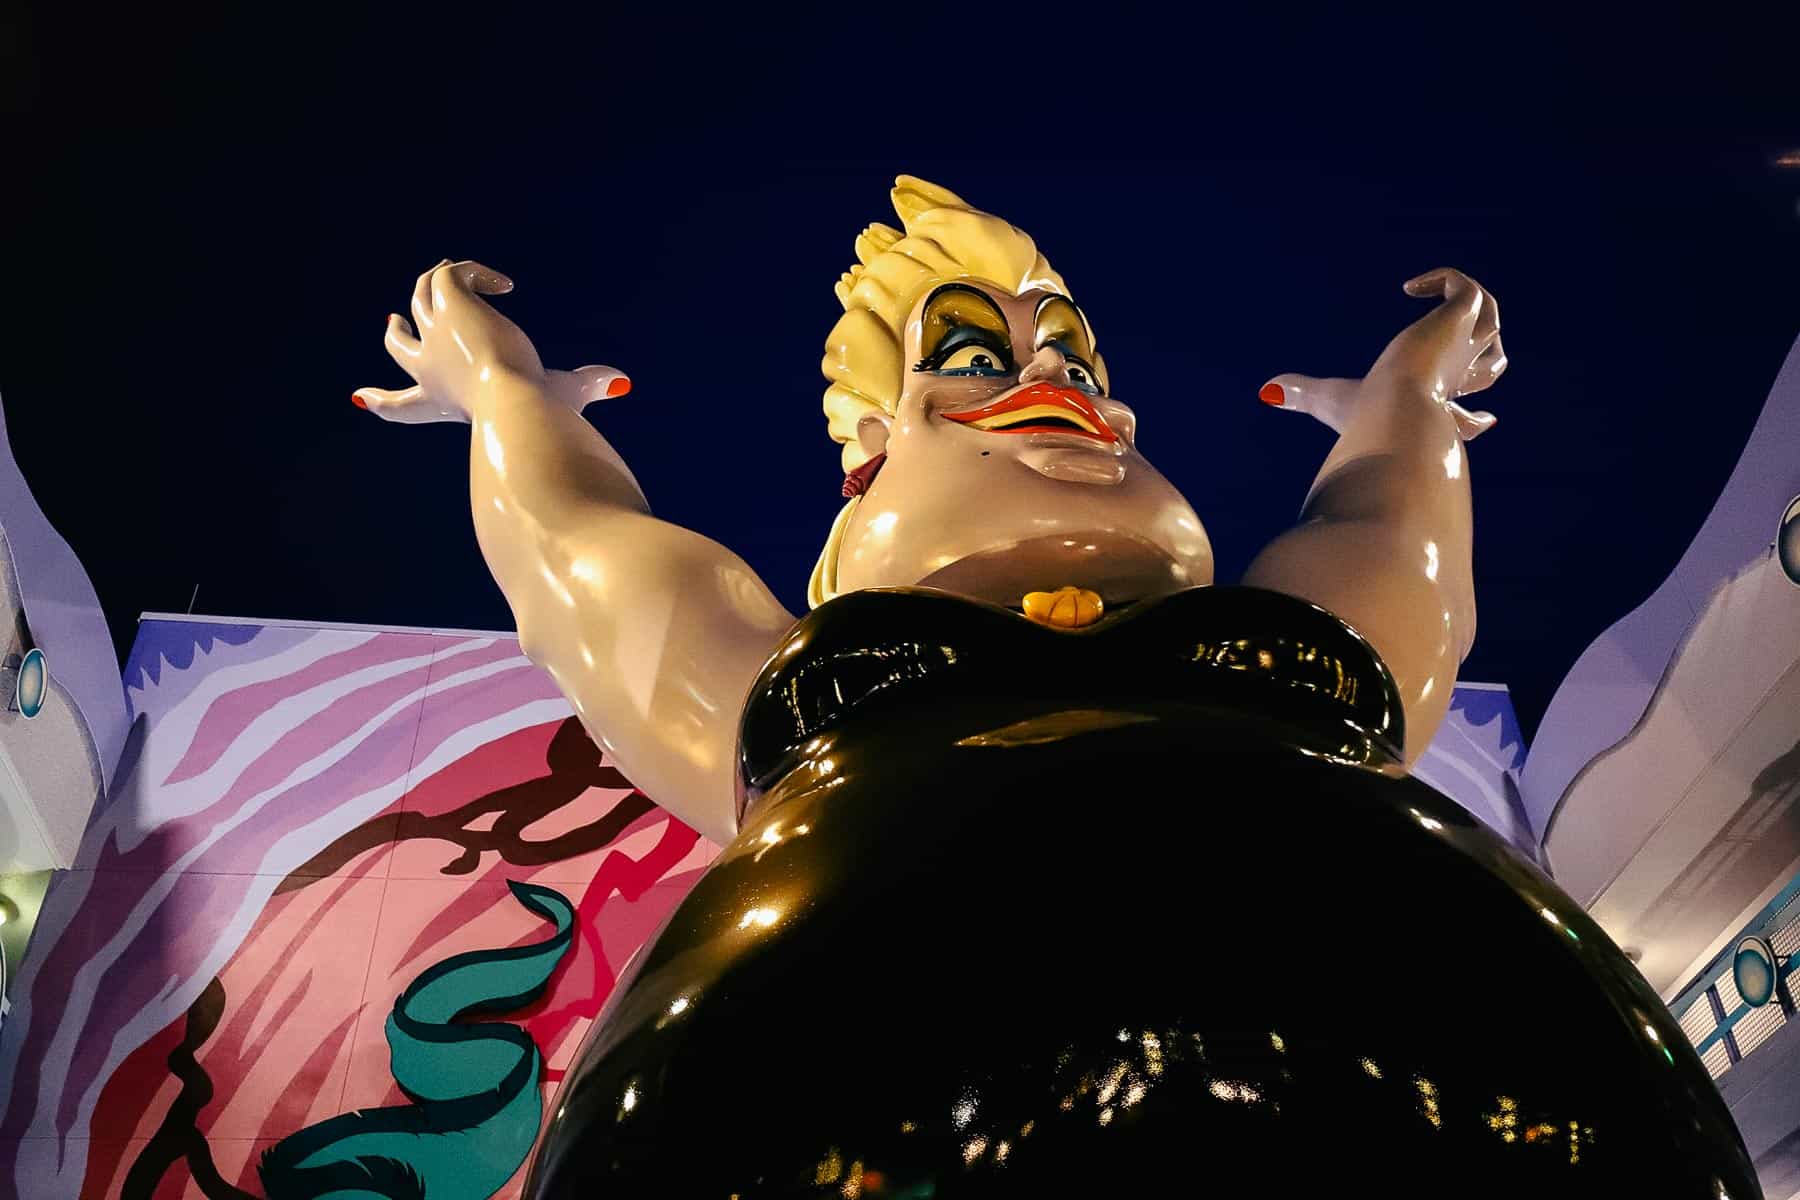 Ursula looks angry as she towers over the Art of Animation. 